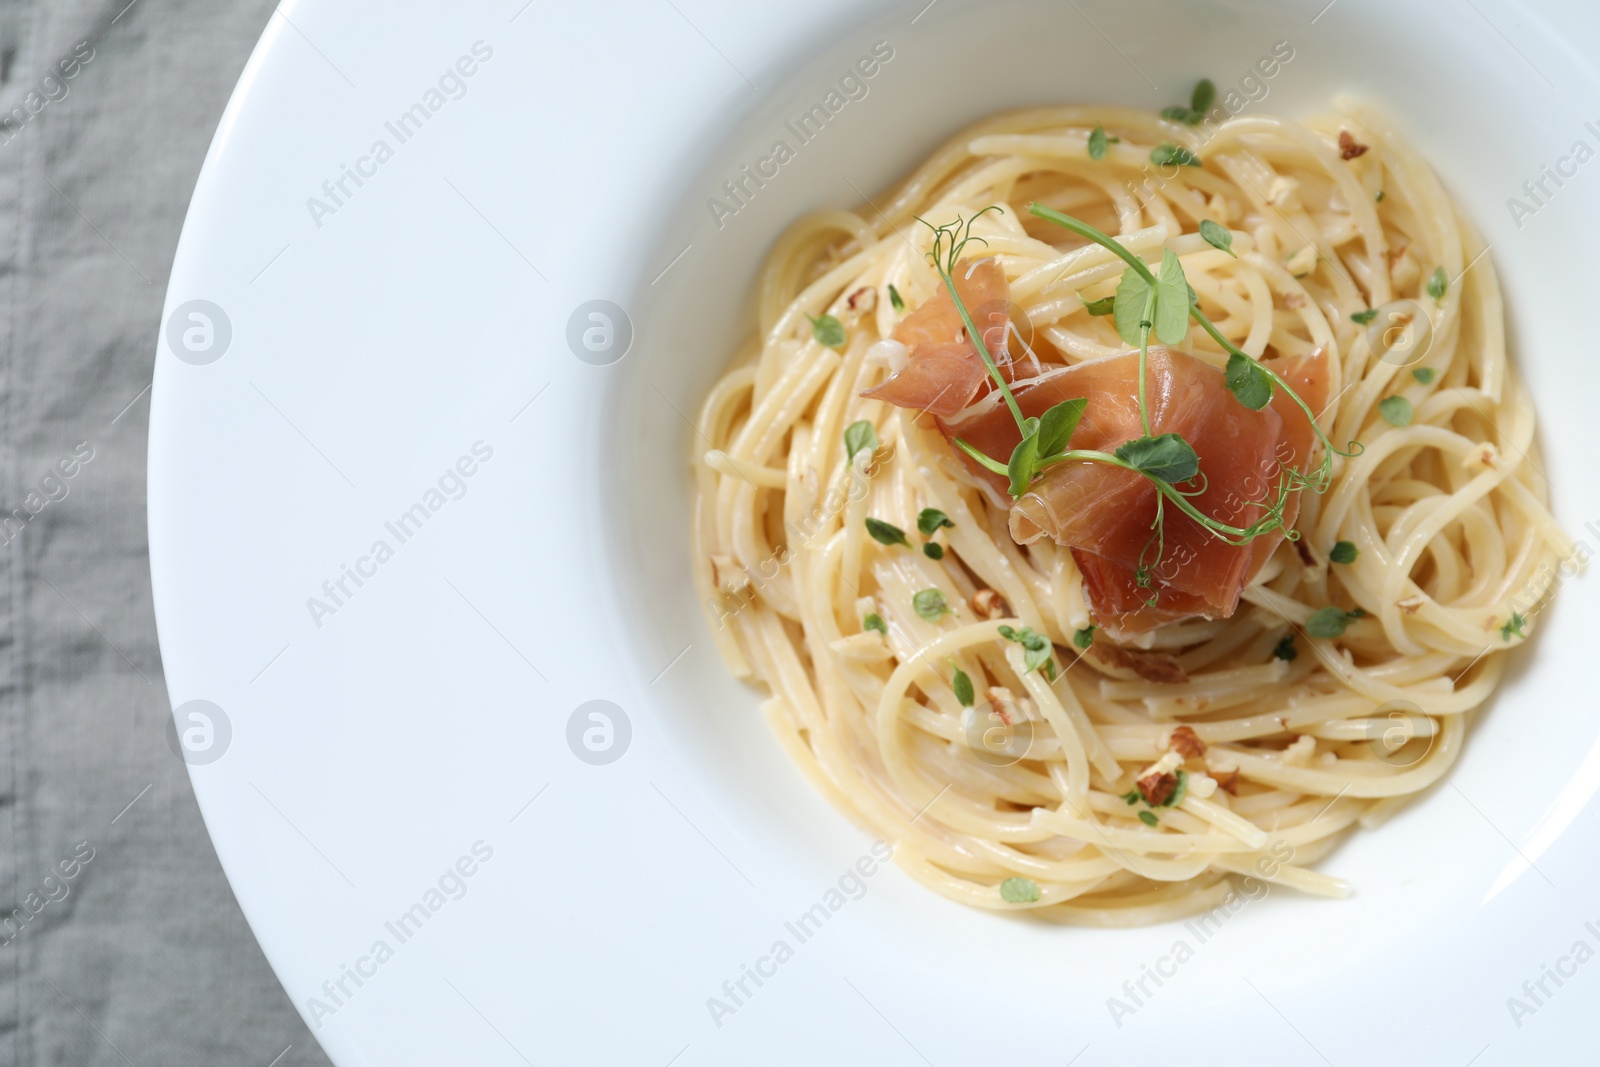 Photo of Tasty spaghetti with prosciutto and microgreens on plate, top view. Exquisite presentation of pasta dish